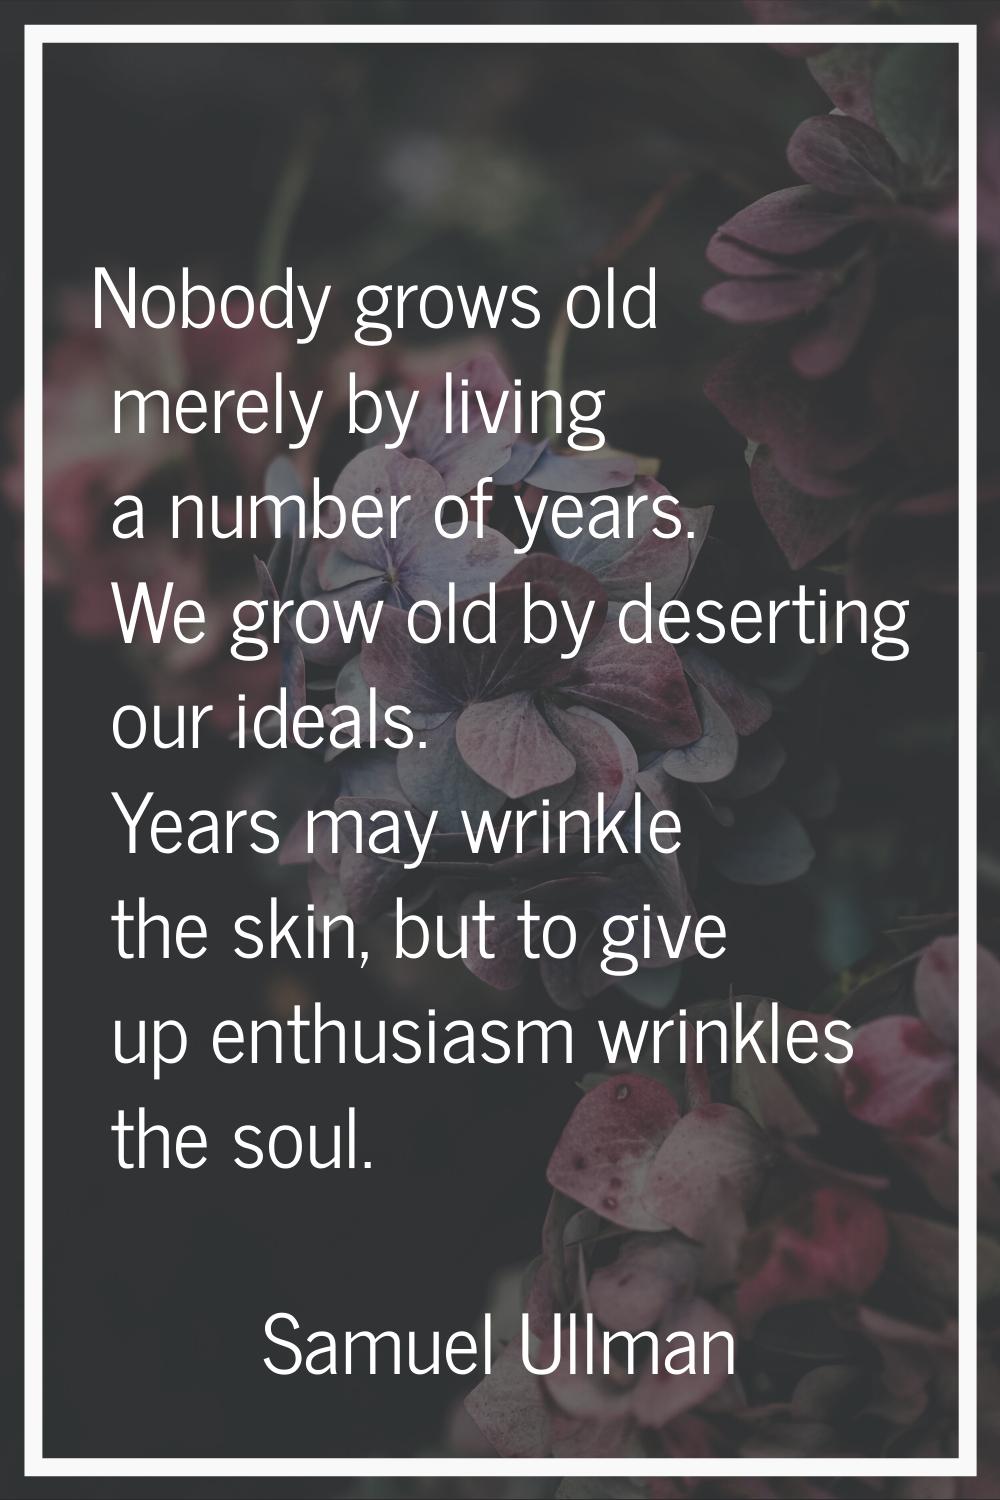 Nobody grows old merely by living a number of years. We grow old by deserting our ideals. Years may